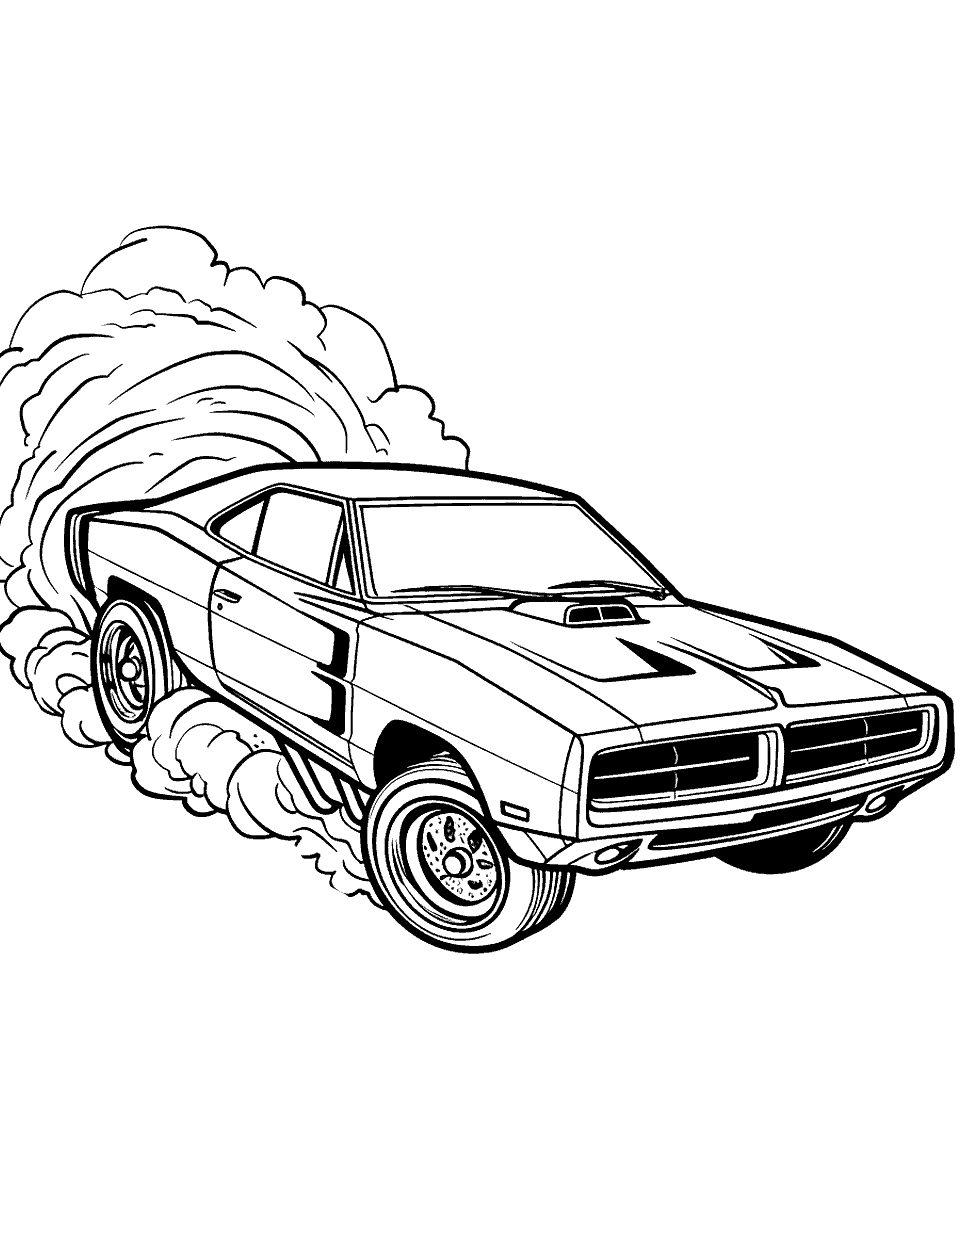 Dodge Charger Getaway Coloring Page - A classic Dodge Charger evading capture, with a cloud of dust behind it.